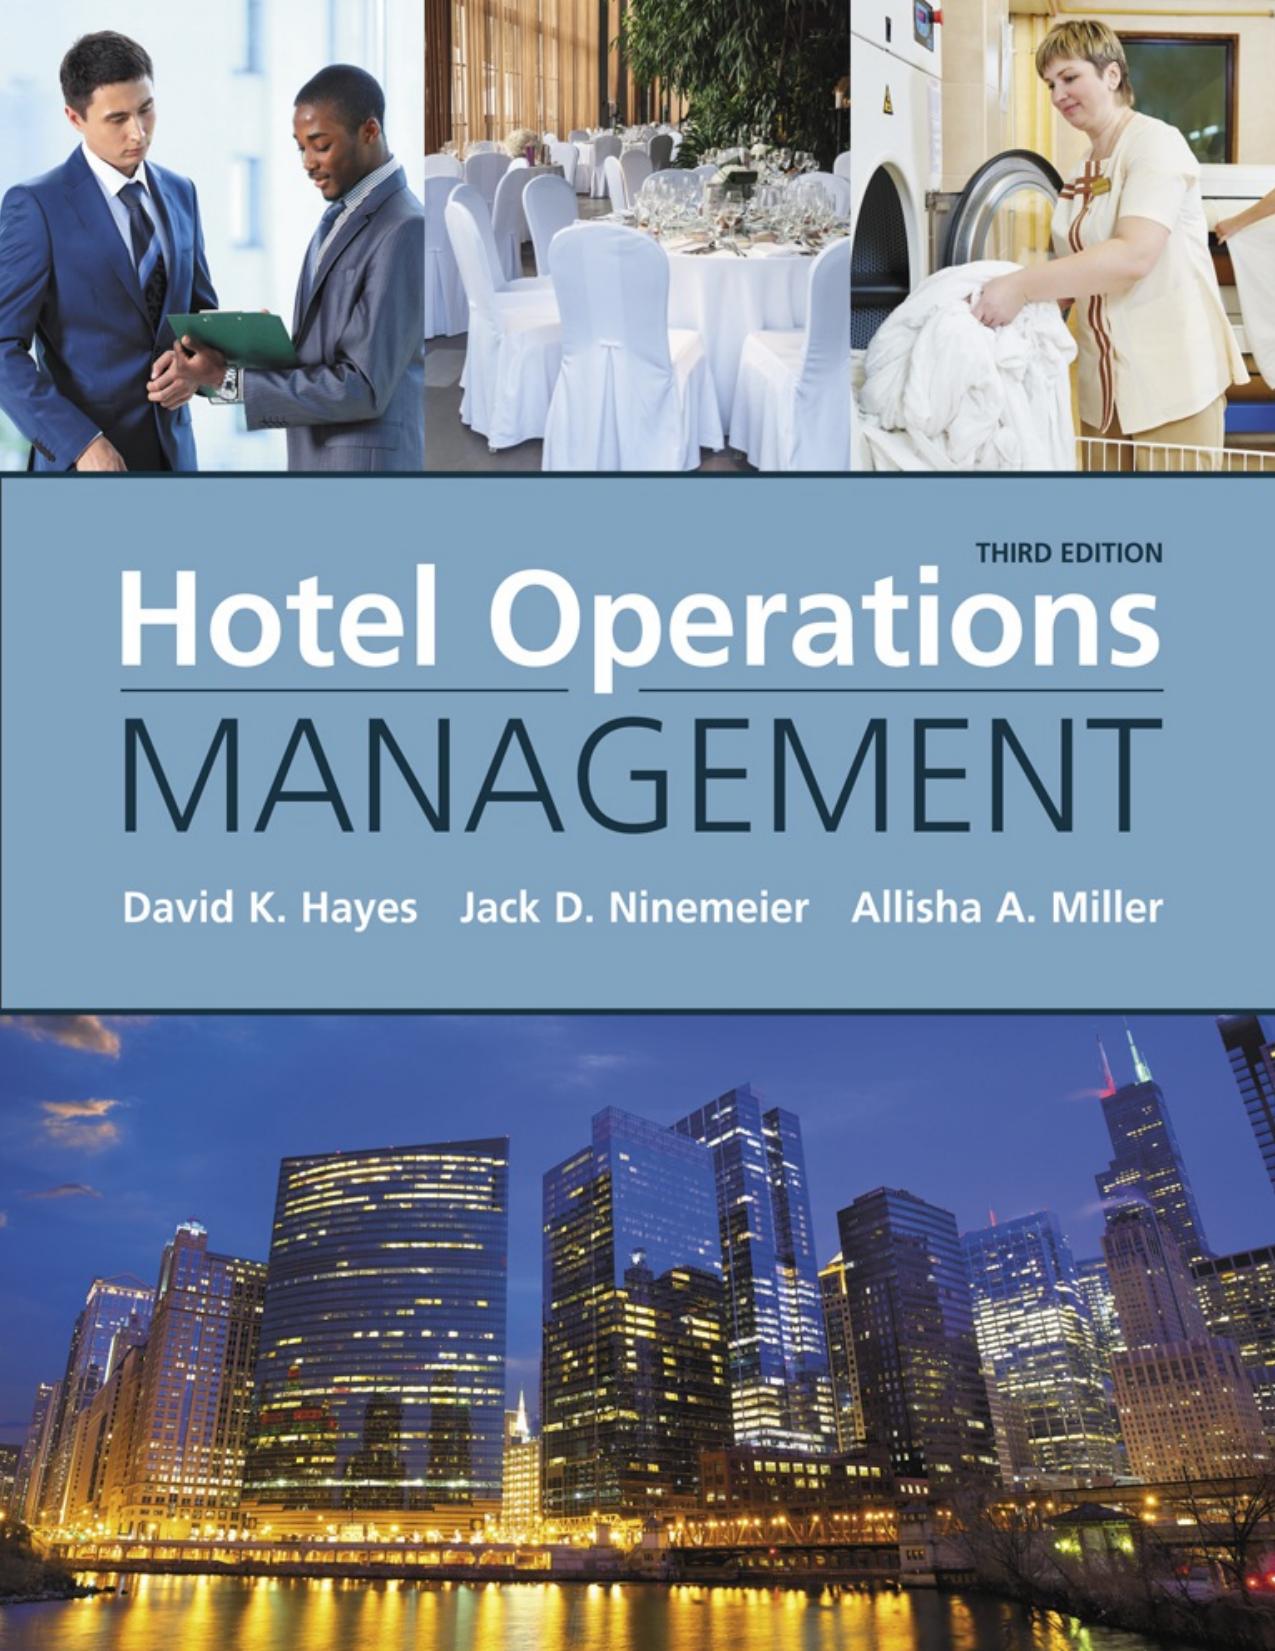 Hotel Operations Management 3rd Edition by David K. Hayes.jpg